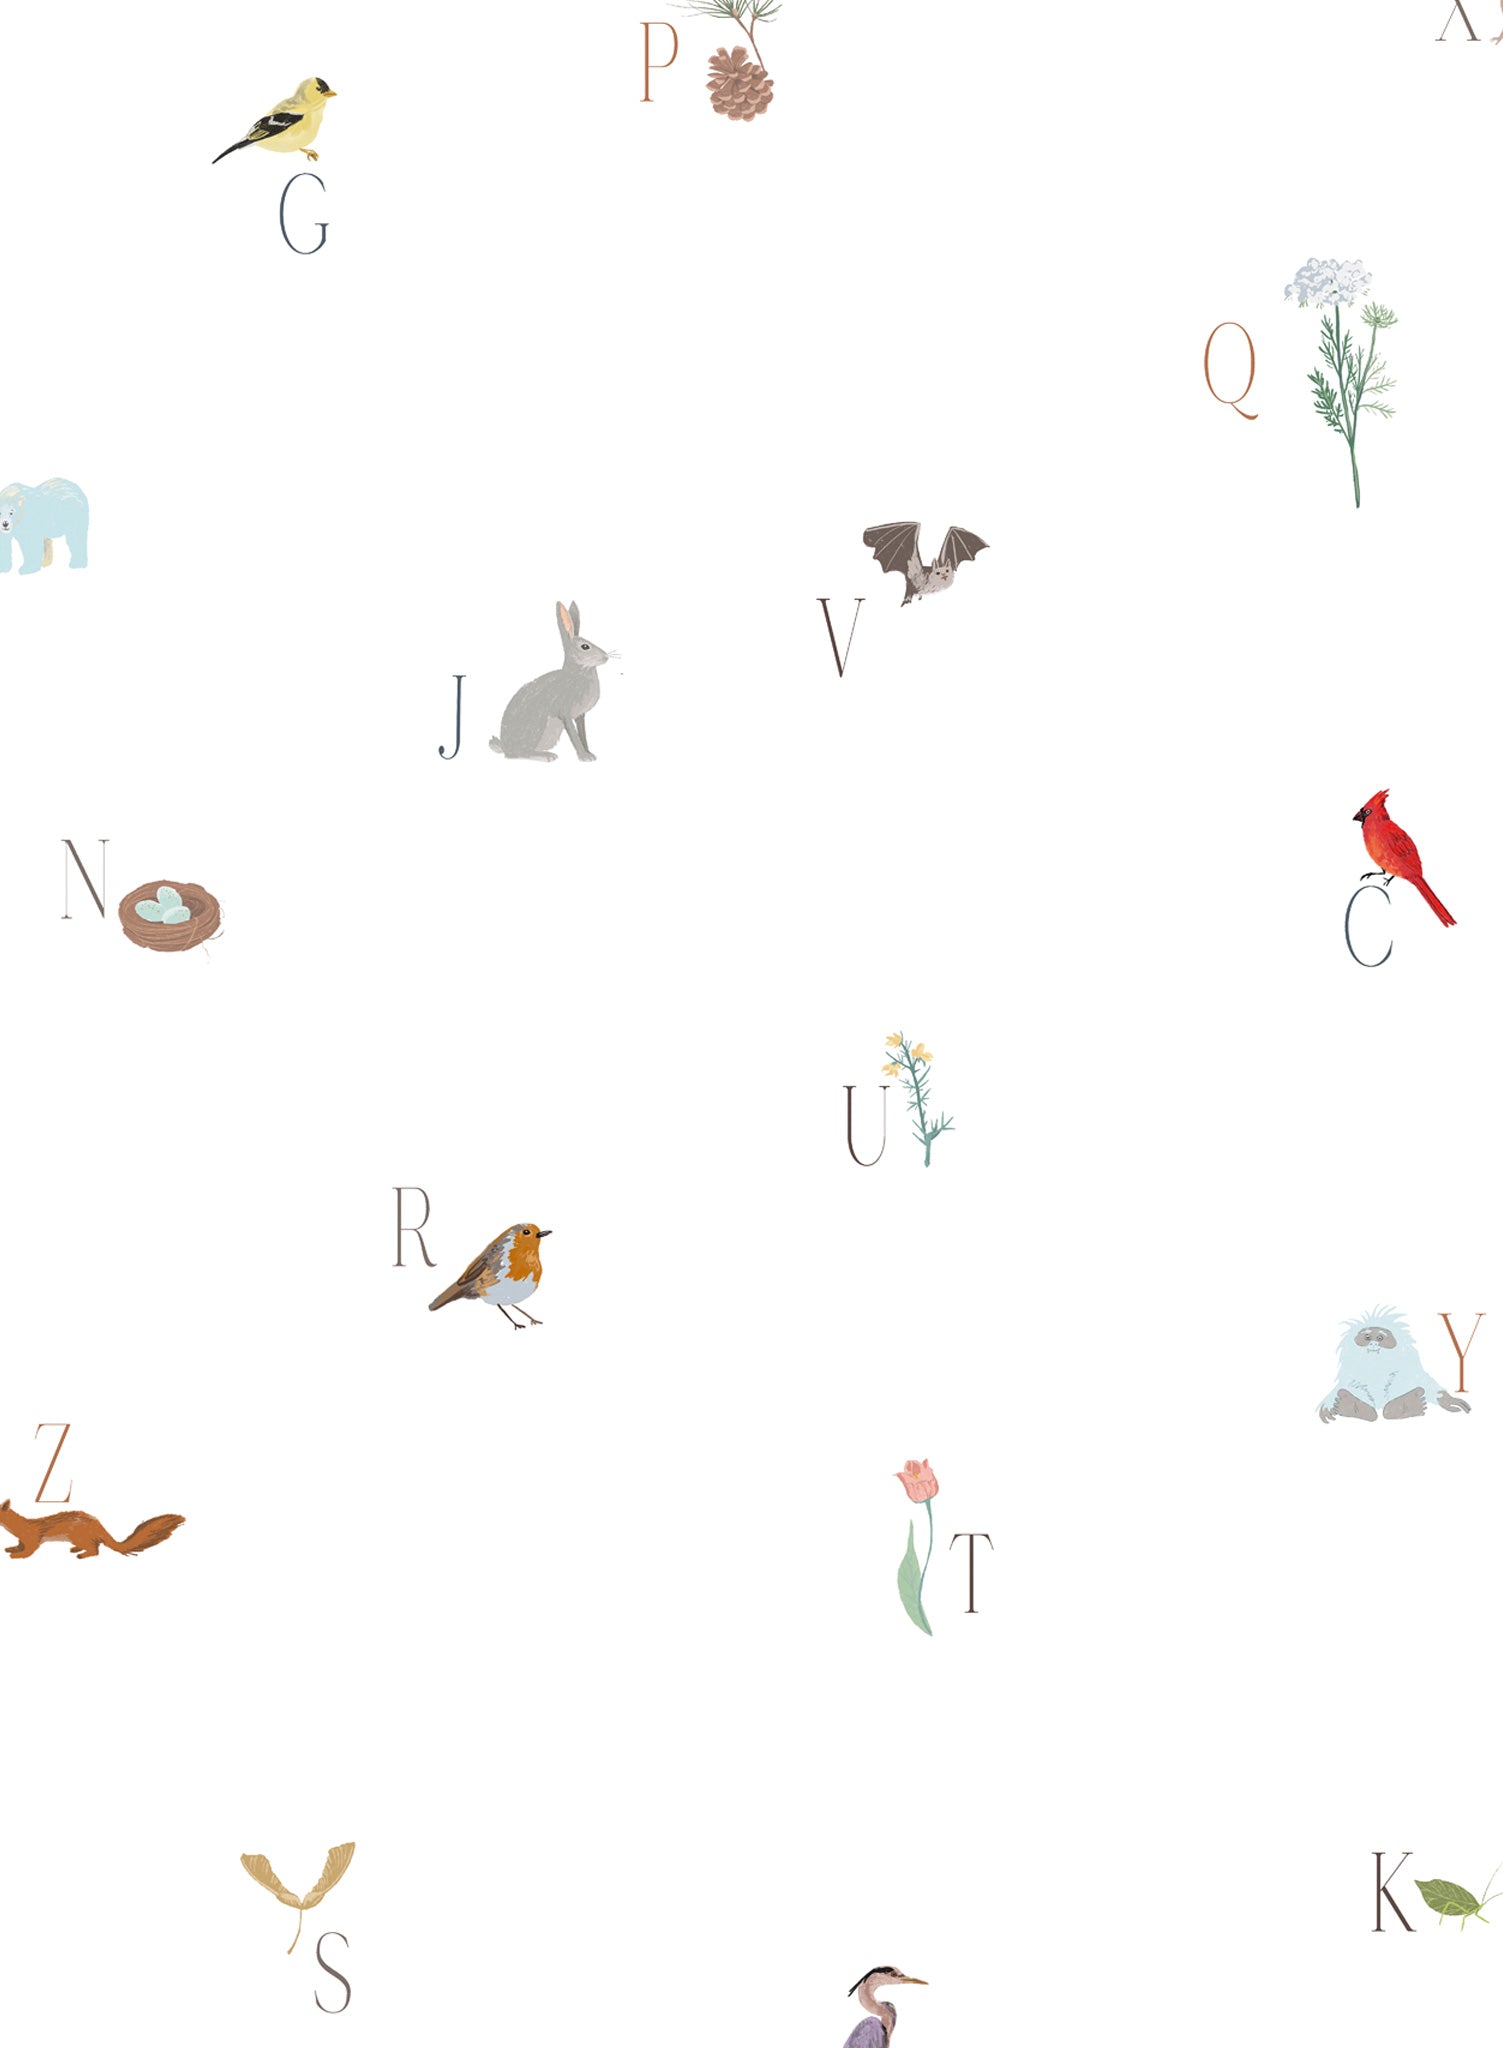 Woodland Lesson in English is a Minimalist wallpaper by Opposite Wall of an alphabet with an animal & forest them